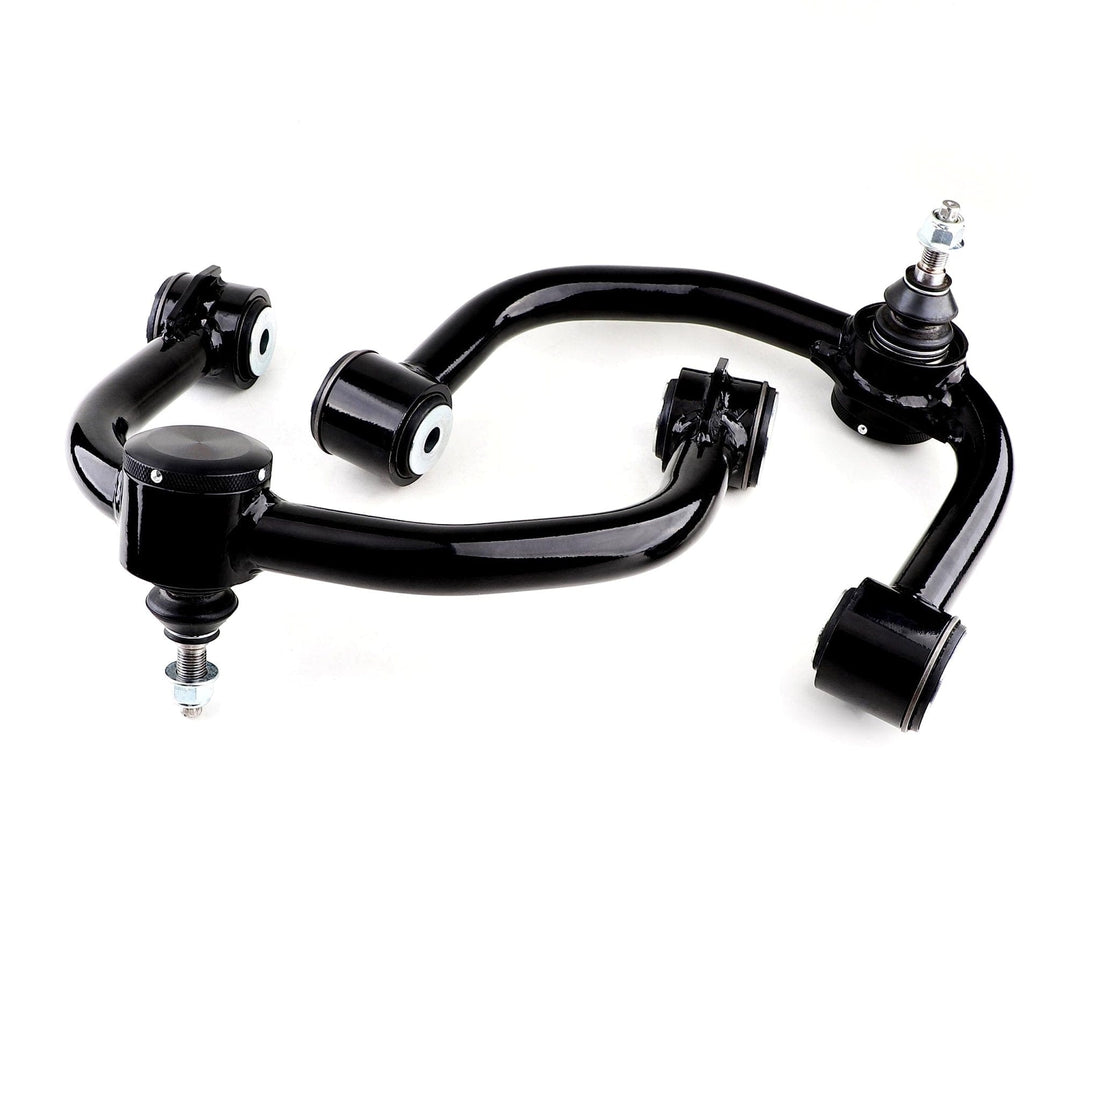 GARVEE Front Upper Control Arms for 07-22 Tundra & Sequoia 2x - GARVEE